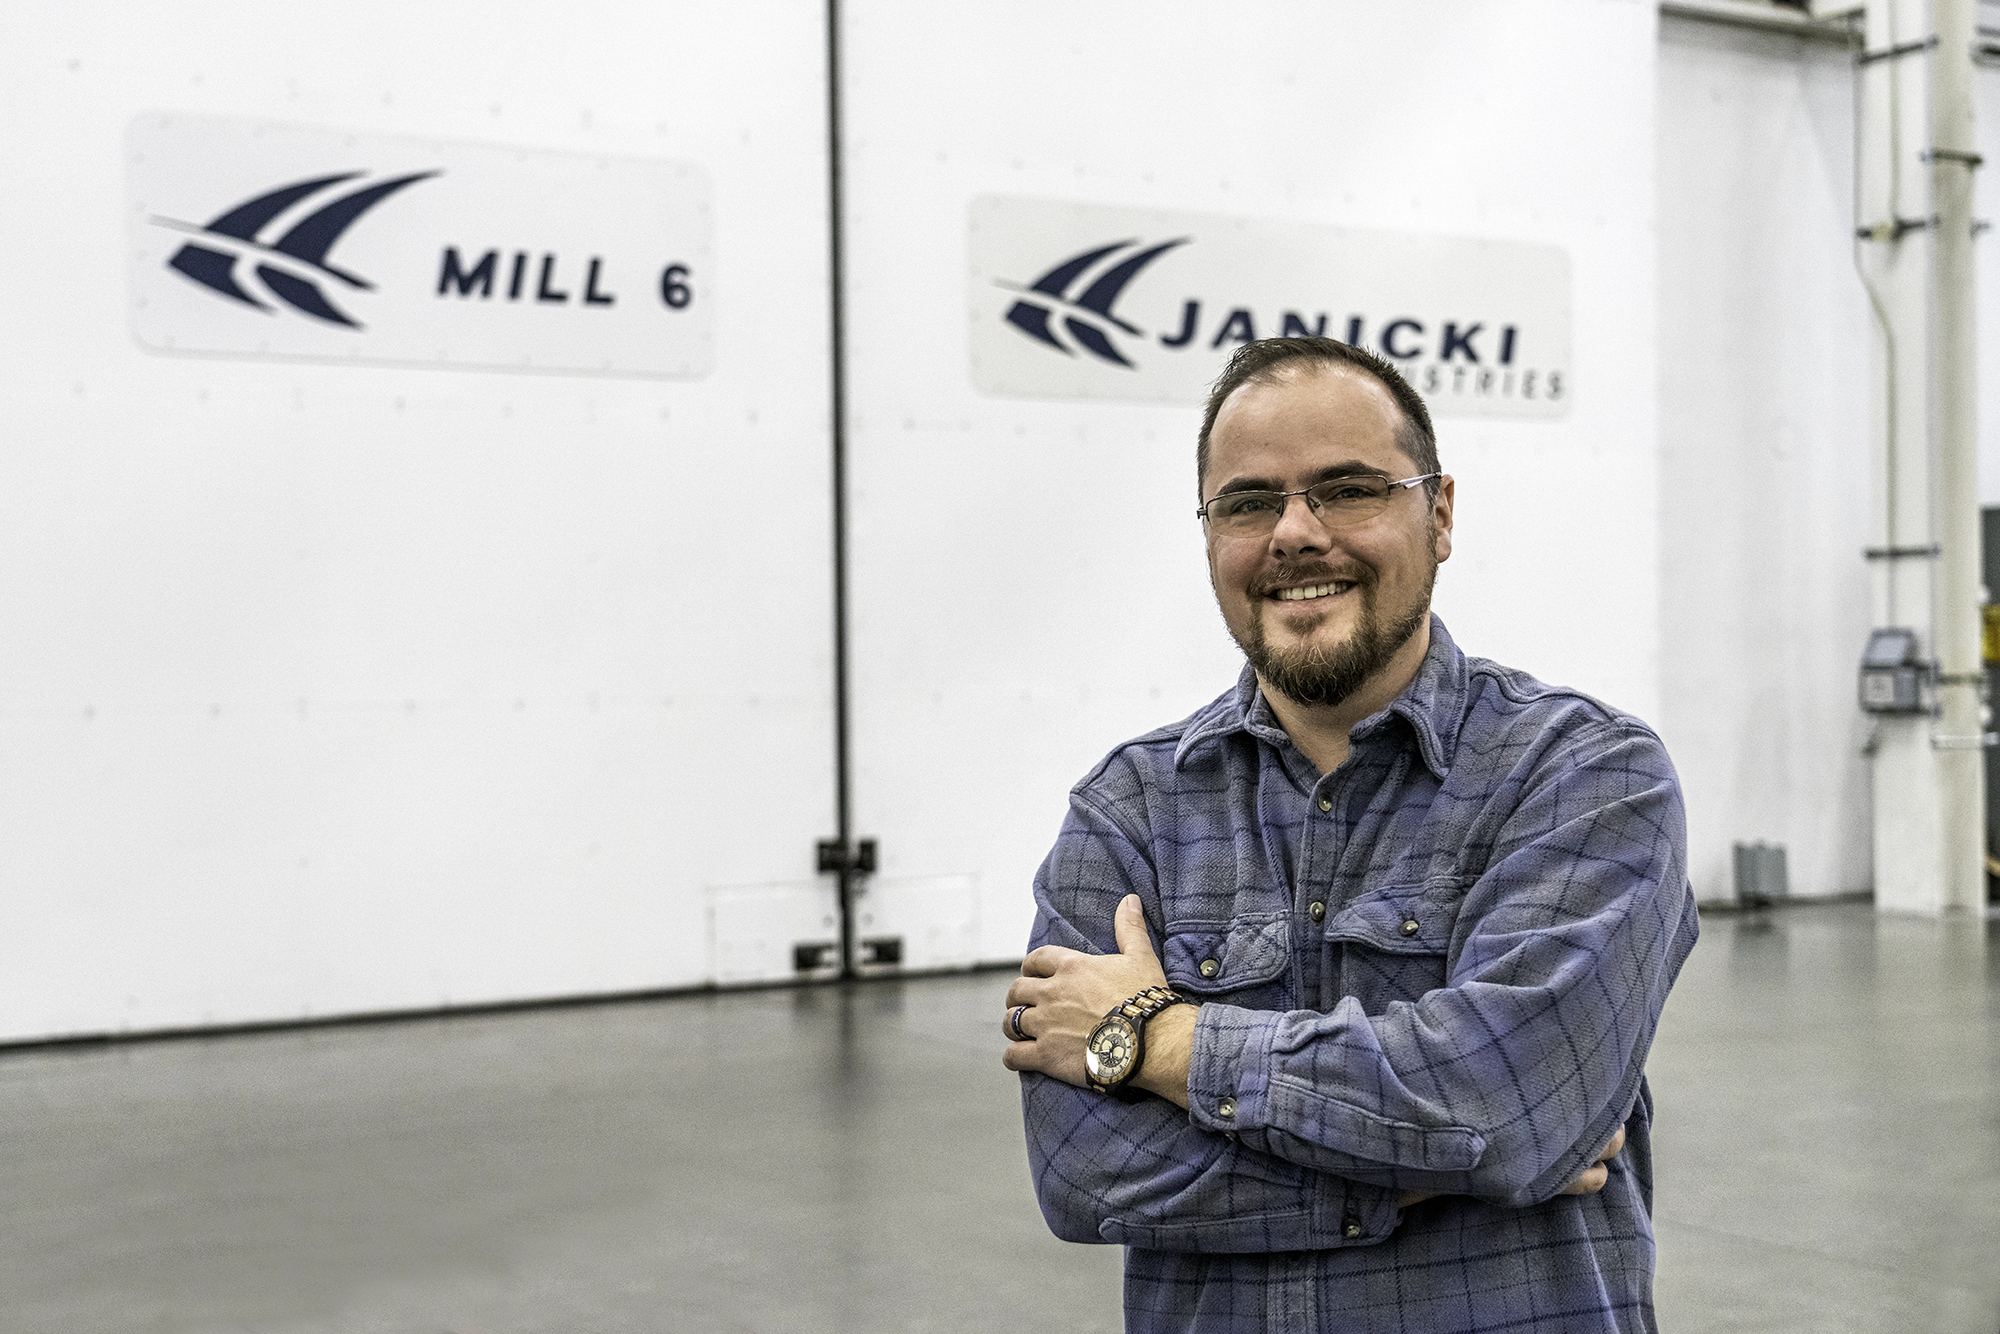 Employee Nick in front of Mill 6